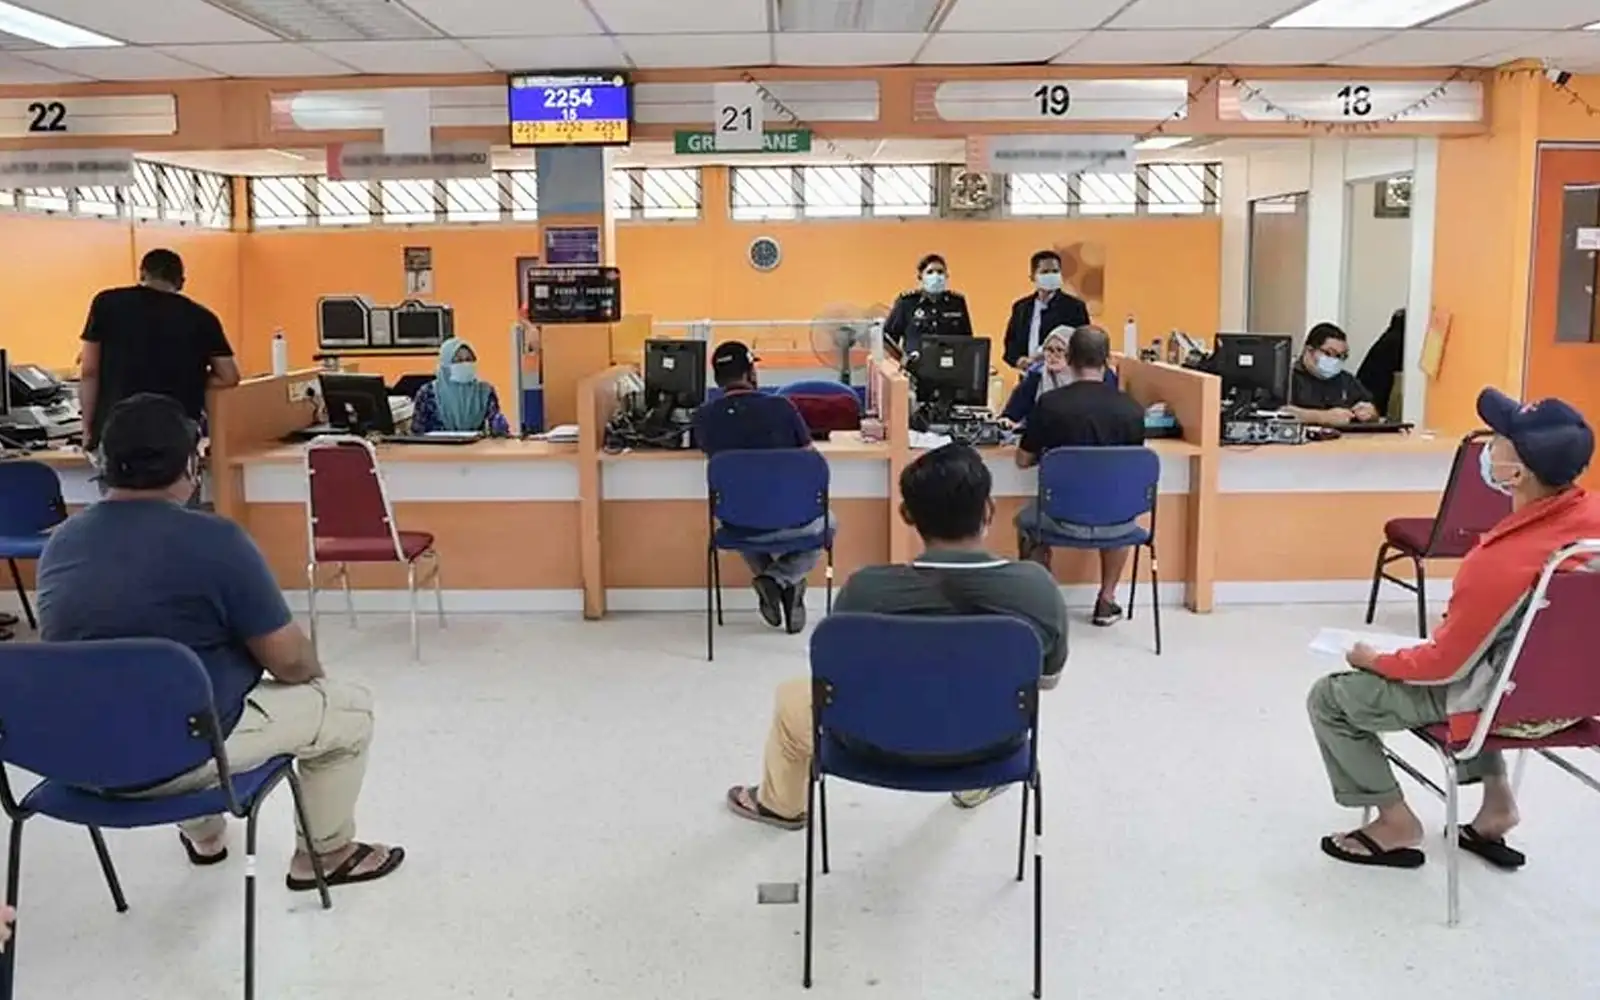 keep counters open at all times, govt departments told